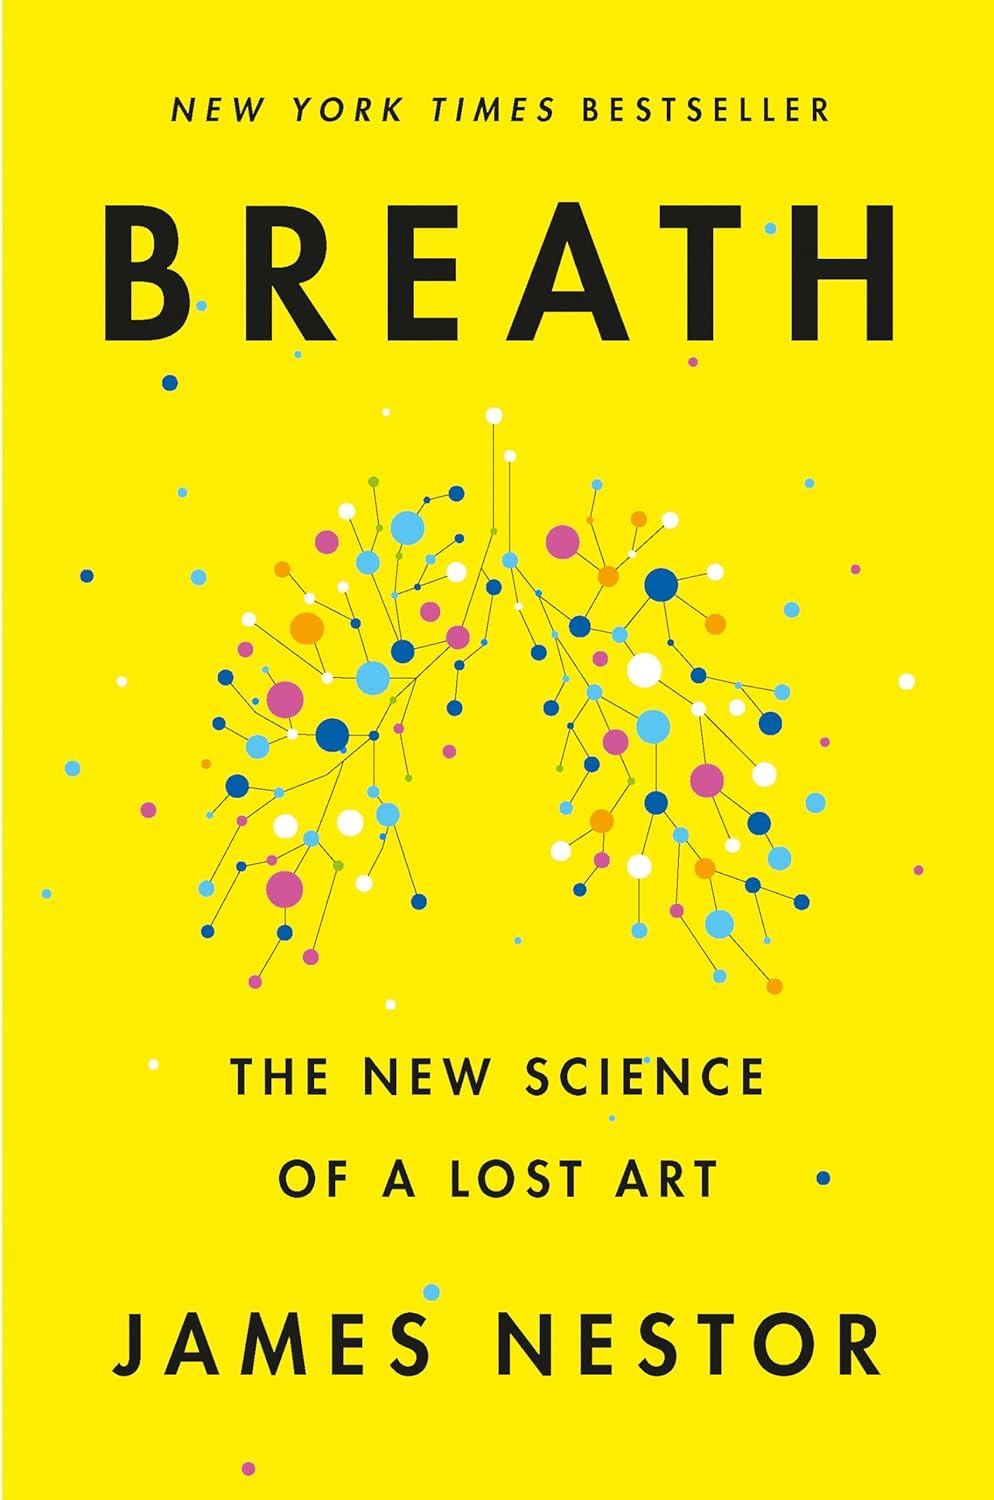 Breath The New Science of a Lost Art Hardcover – May 26 2020